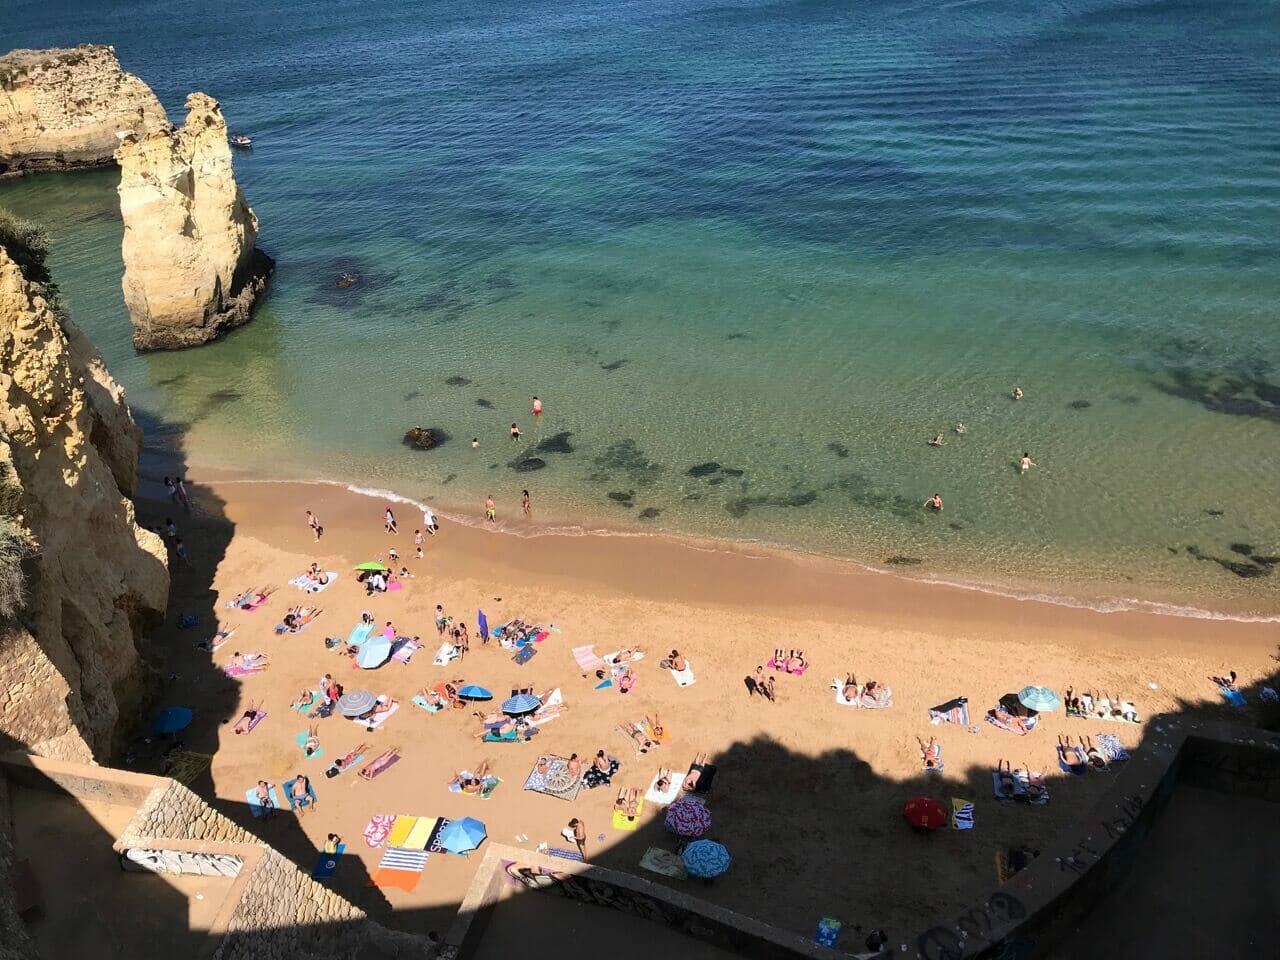 aerial view of Praia do Pinhão with many people sunbathing, others swimming in the crystalline green-blueish water some yellow cliffs